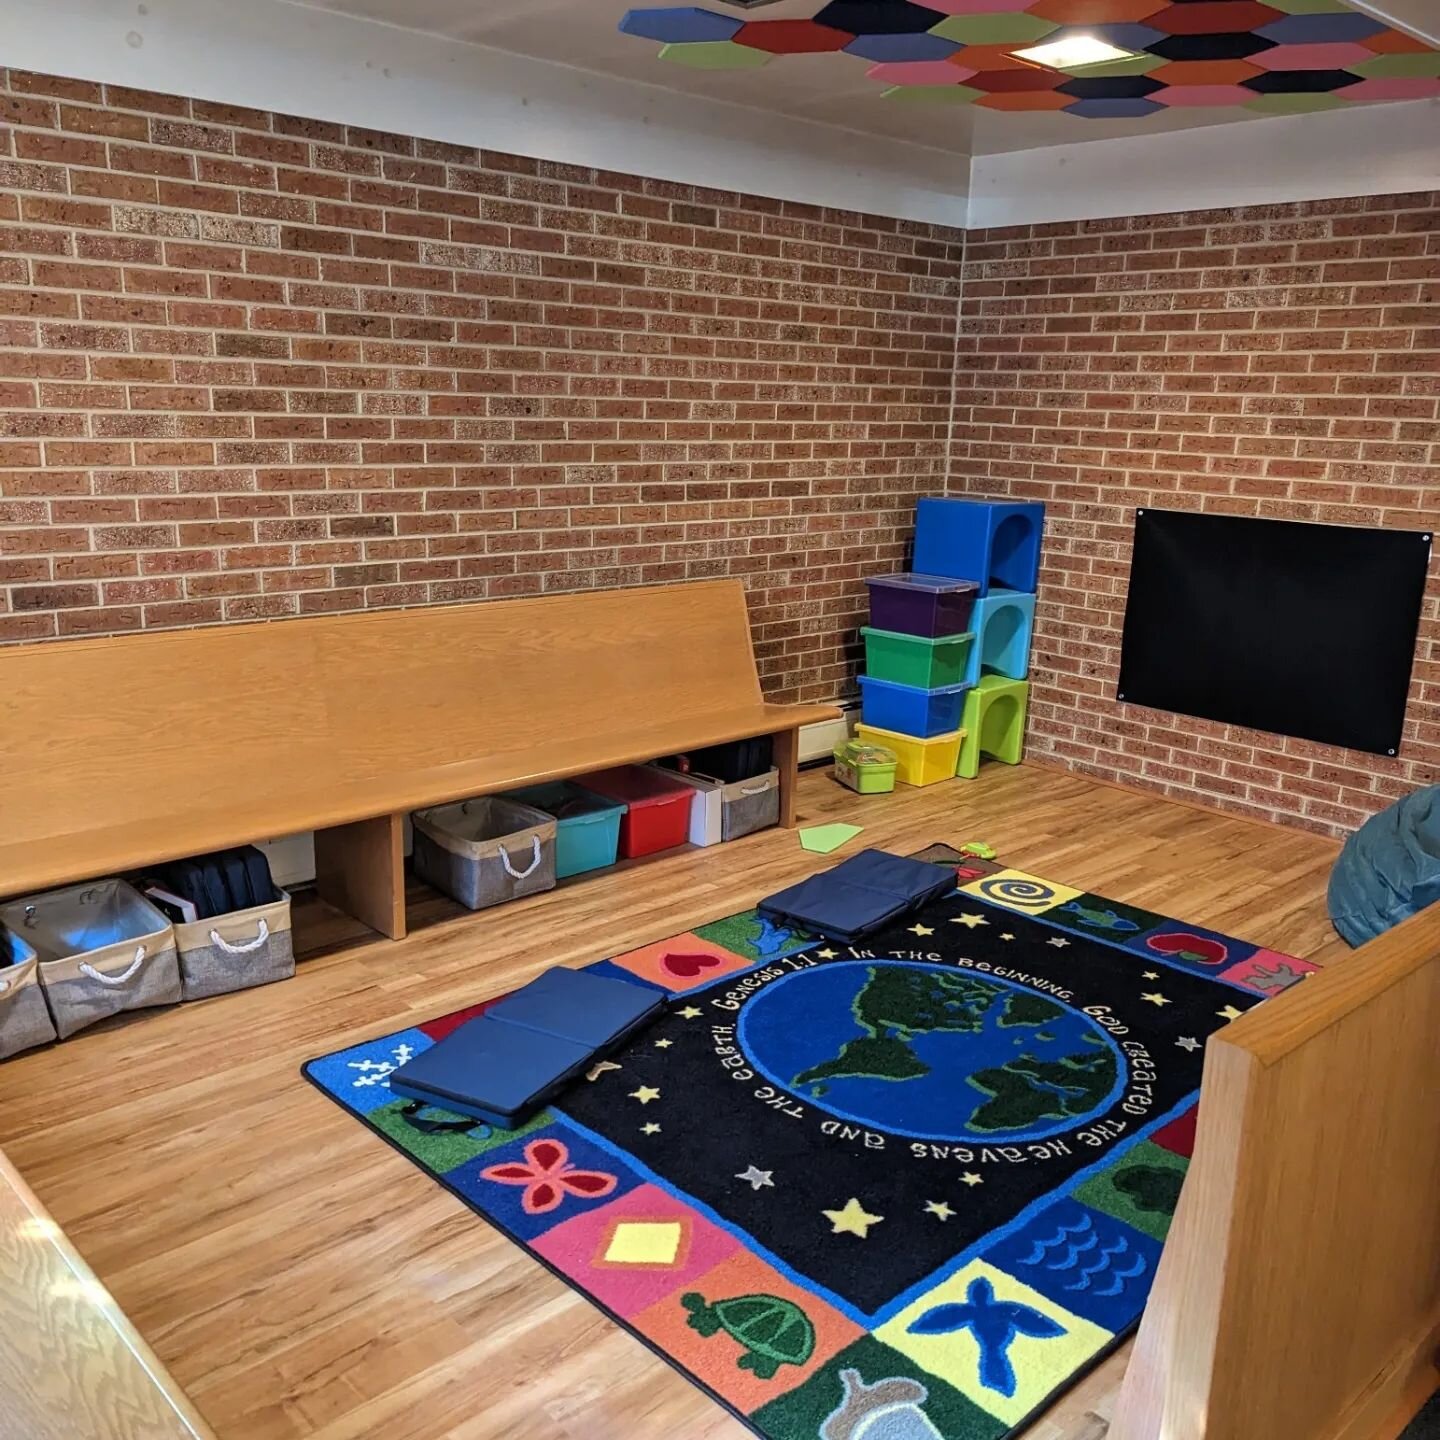 Our Pray Ground is looking great these days!

Littles and their families can sit in this area and get their wiggles out while being right up next to the altar! Best seat in the house! Older children who could benefit from books or manipulatives are w